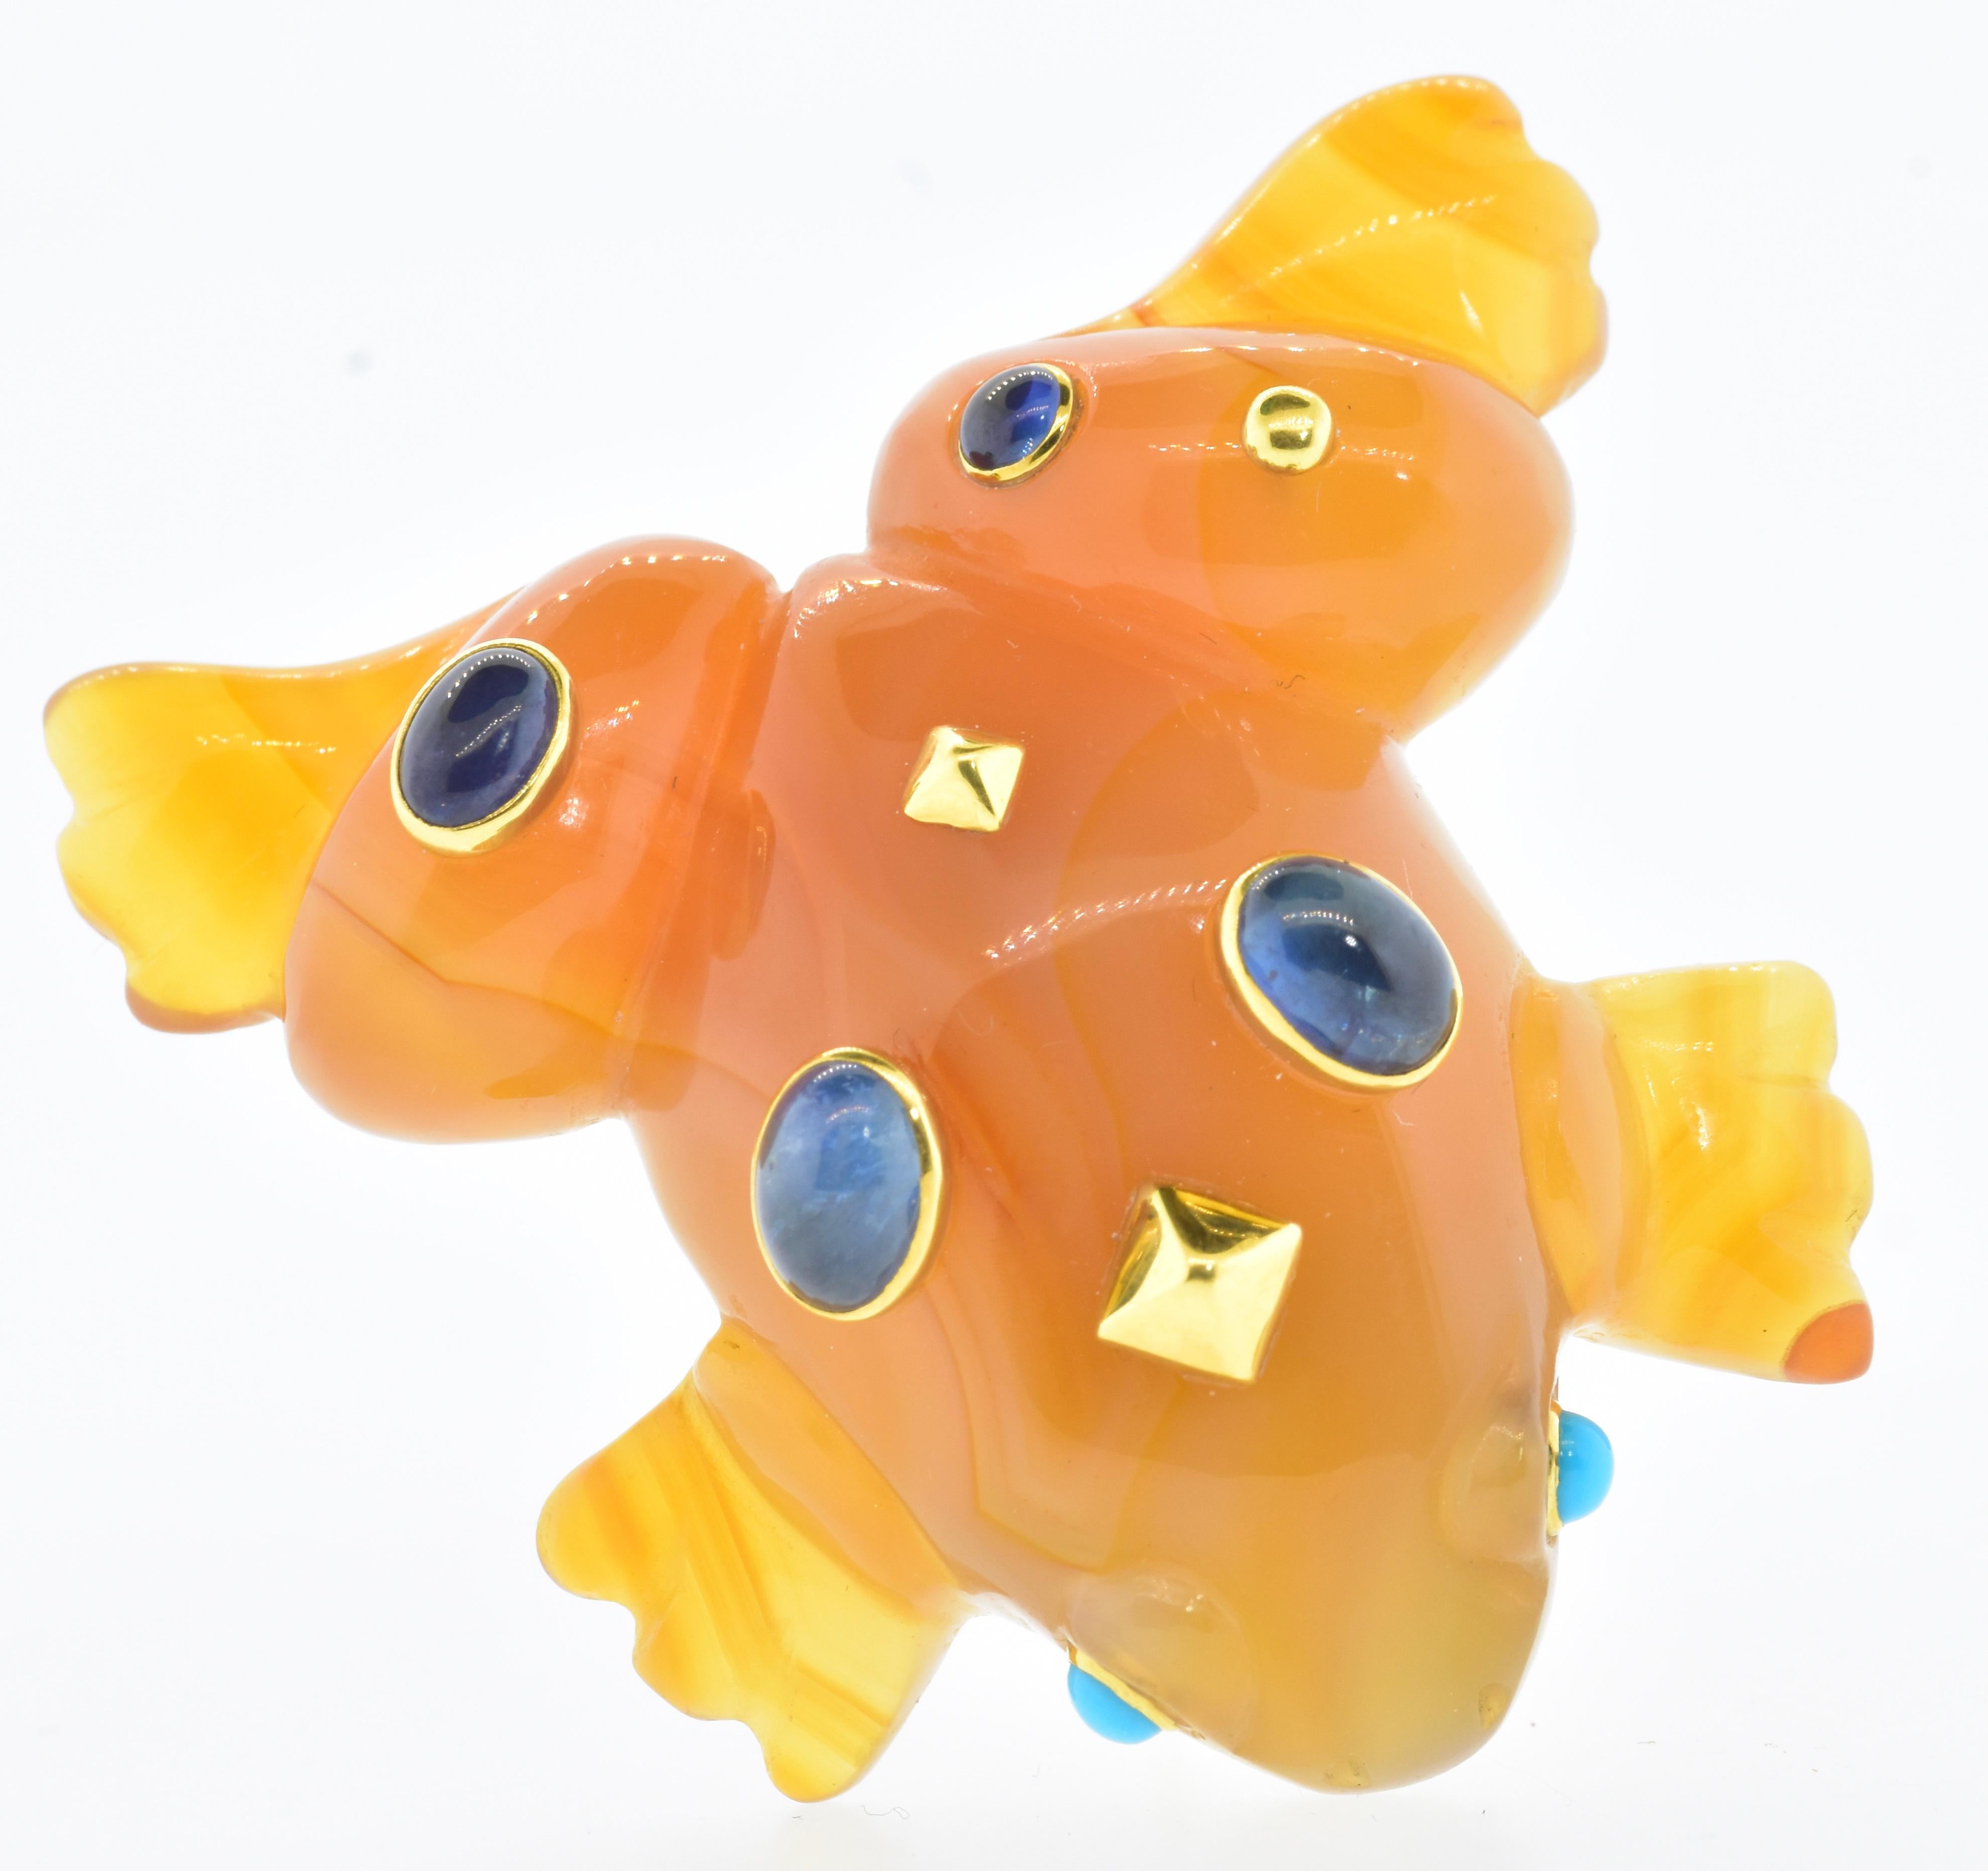 Cabochon Seaman Schepps' Famous Frog Brooch in 8K Carved Carnelian and Sapphires For Sale